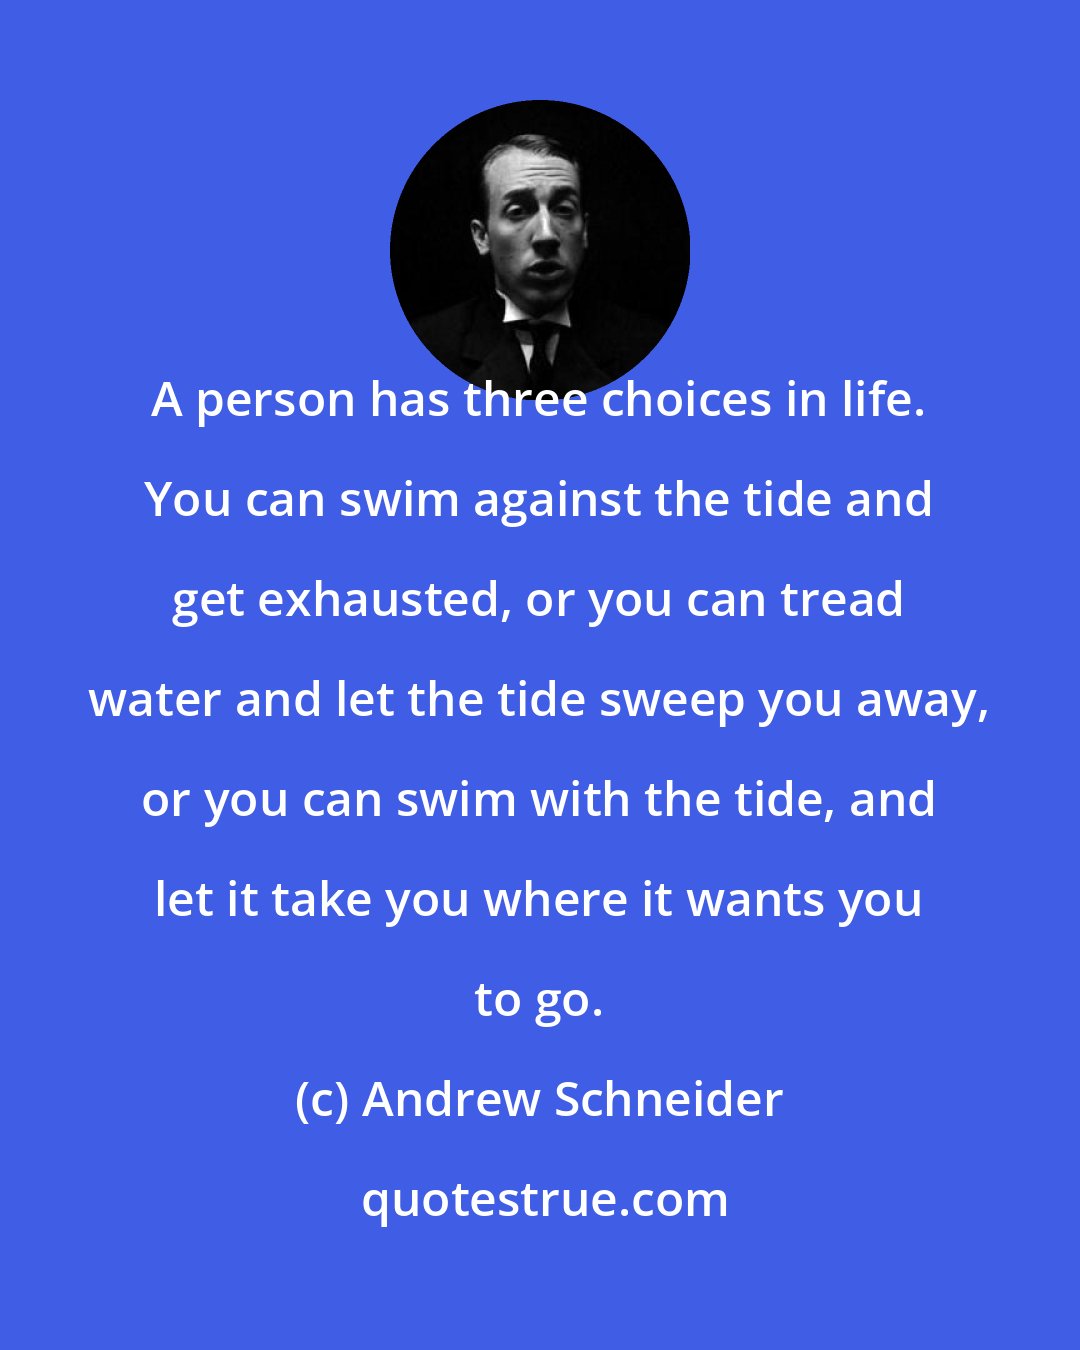 Andrew Schneider: A person has three choices in life. You can swim against the tide and get exhausted, or you can tread water and let the tide sweep you away, or you can swim with the tide, and let it take you where it wants you to go.